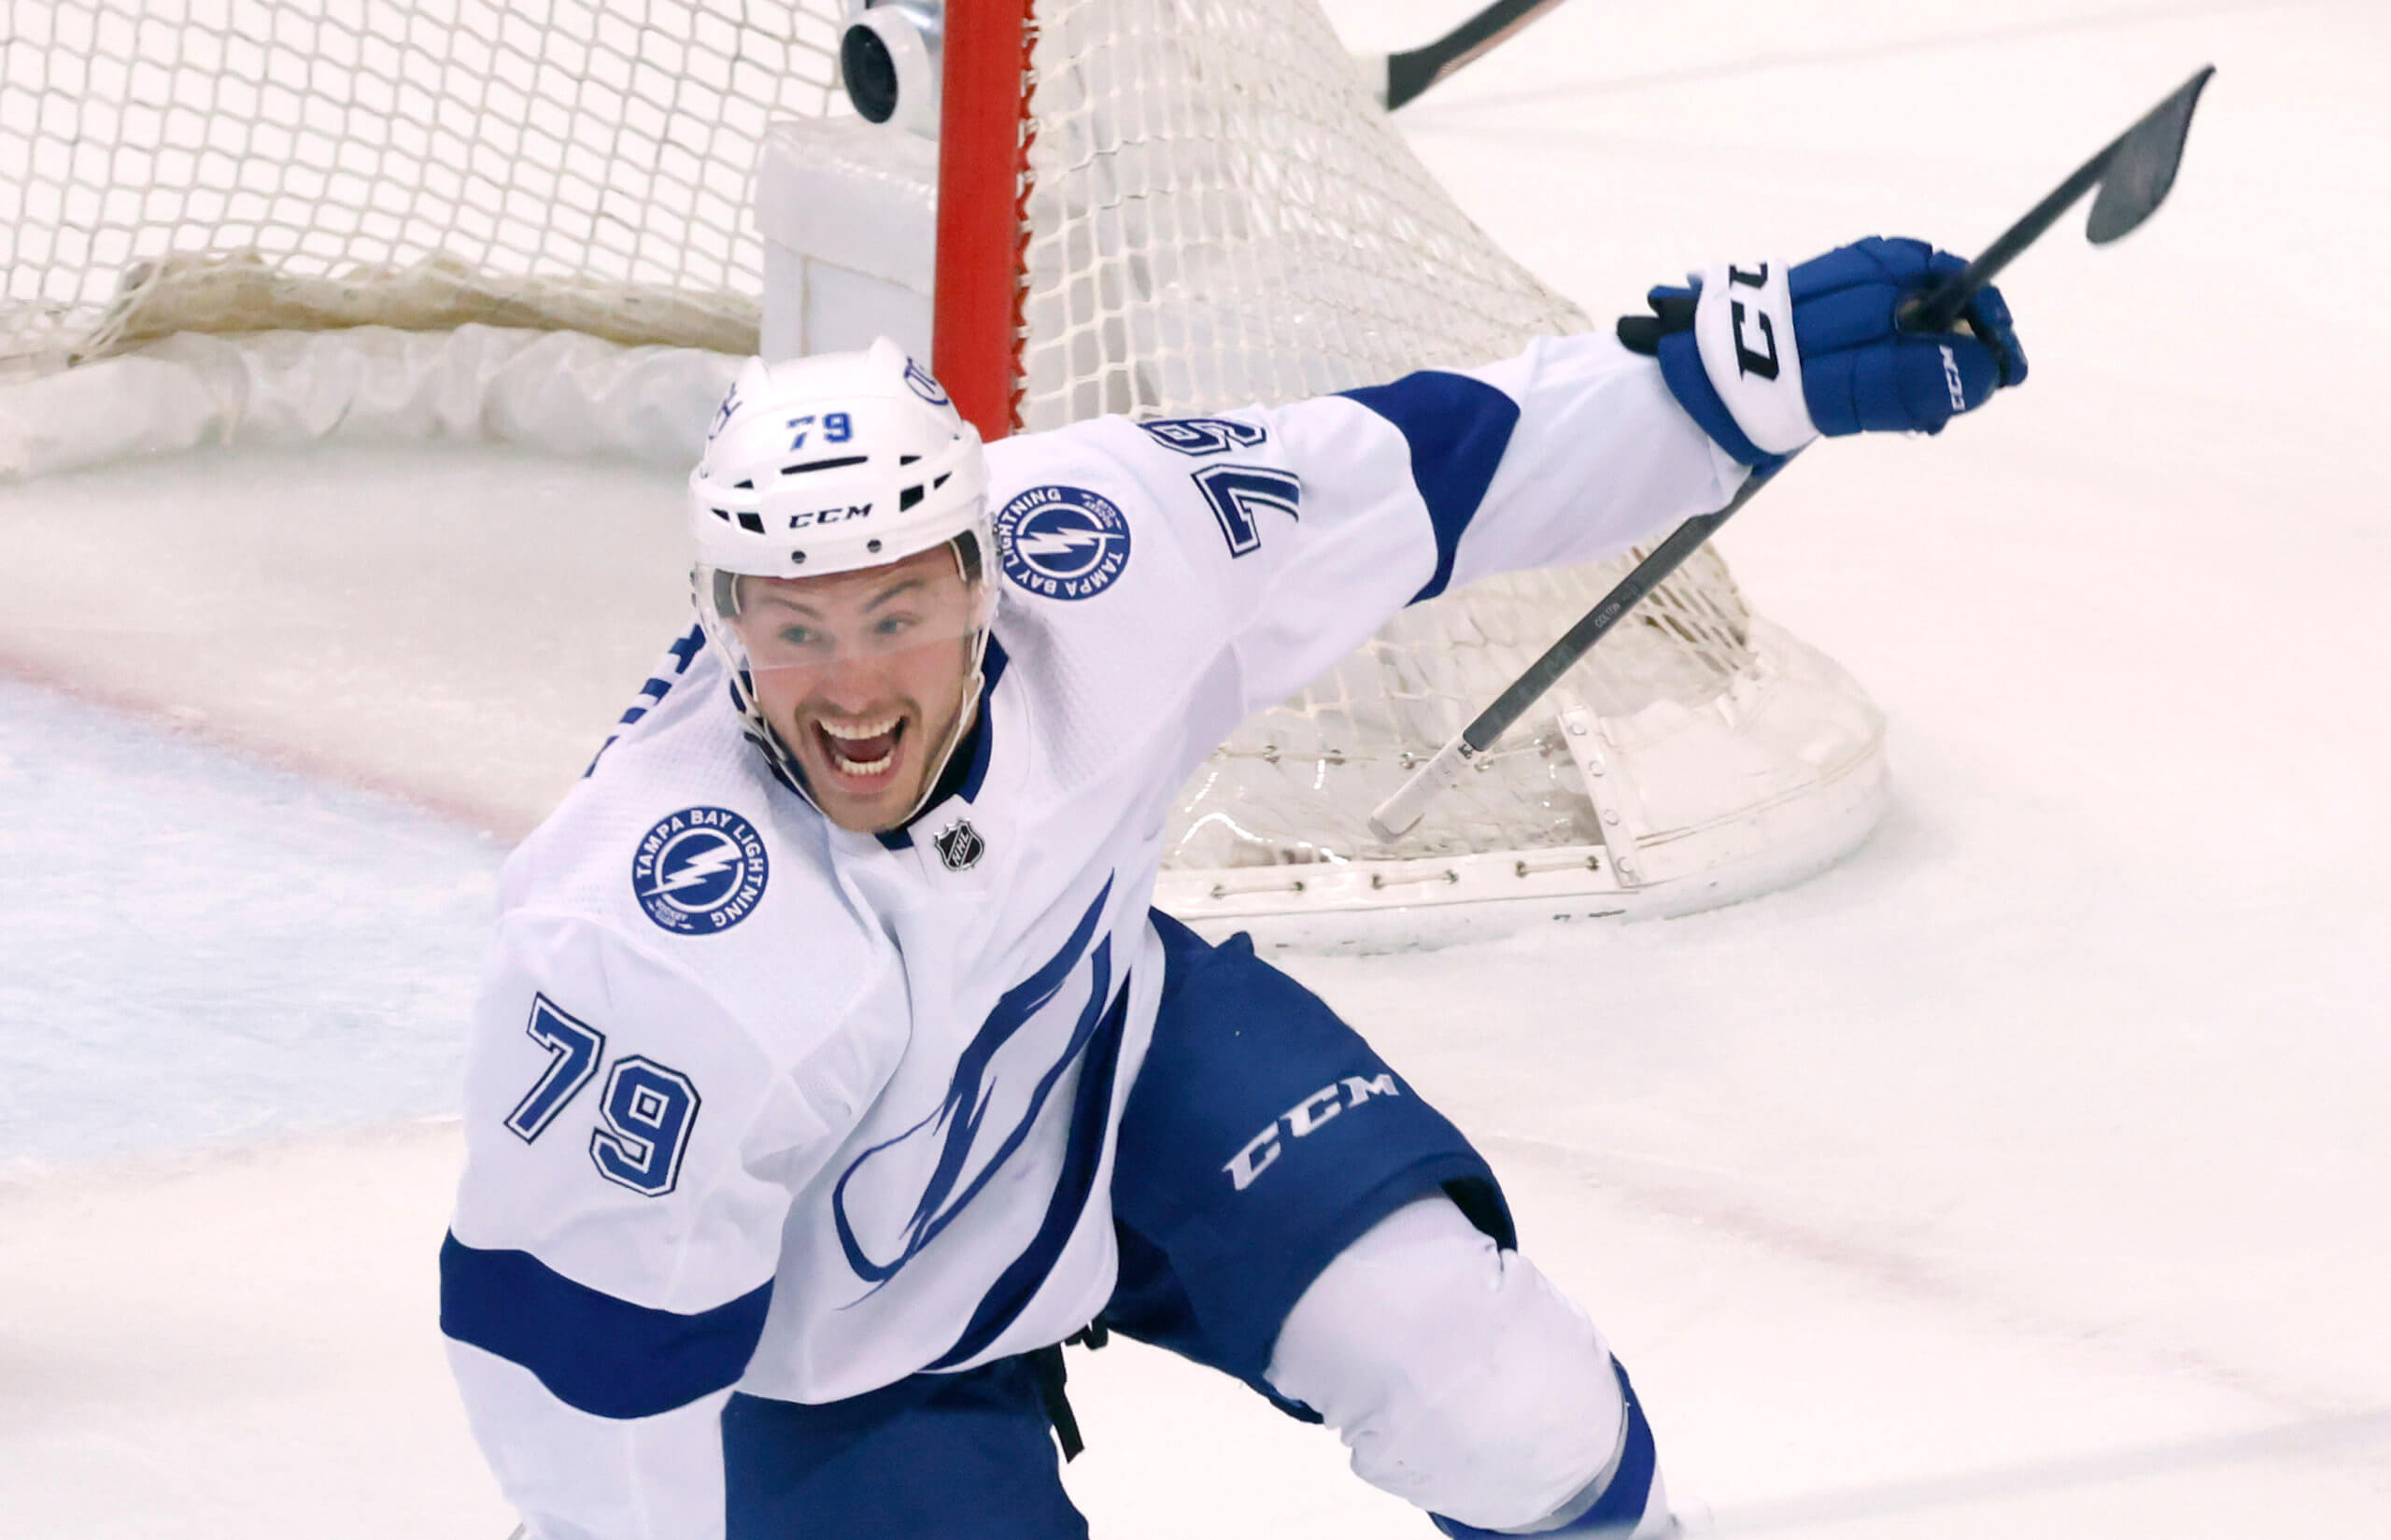 Ross Colton takes on supporting role with defending champ Lightning